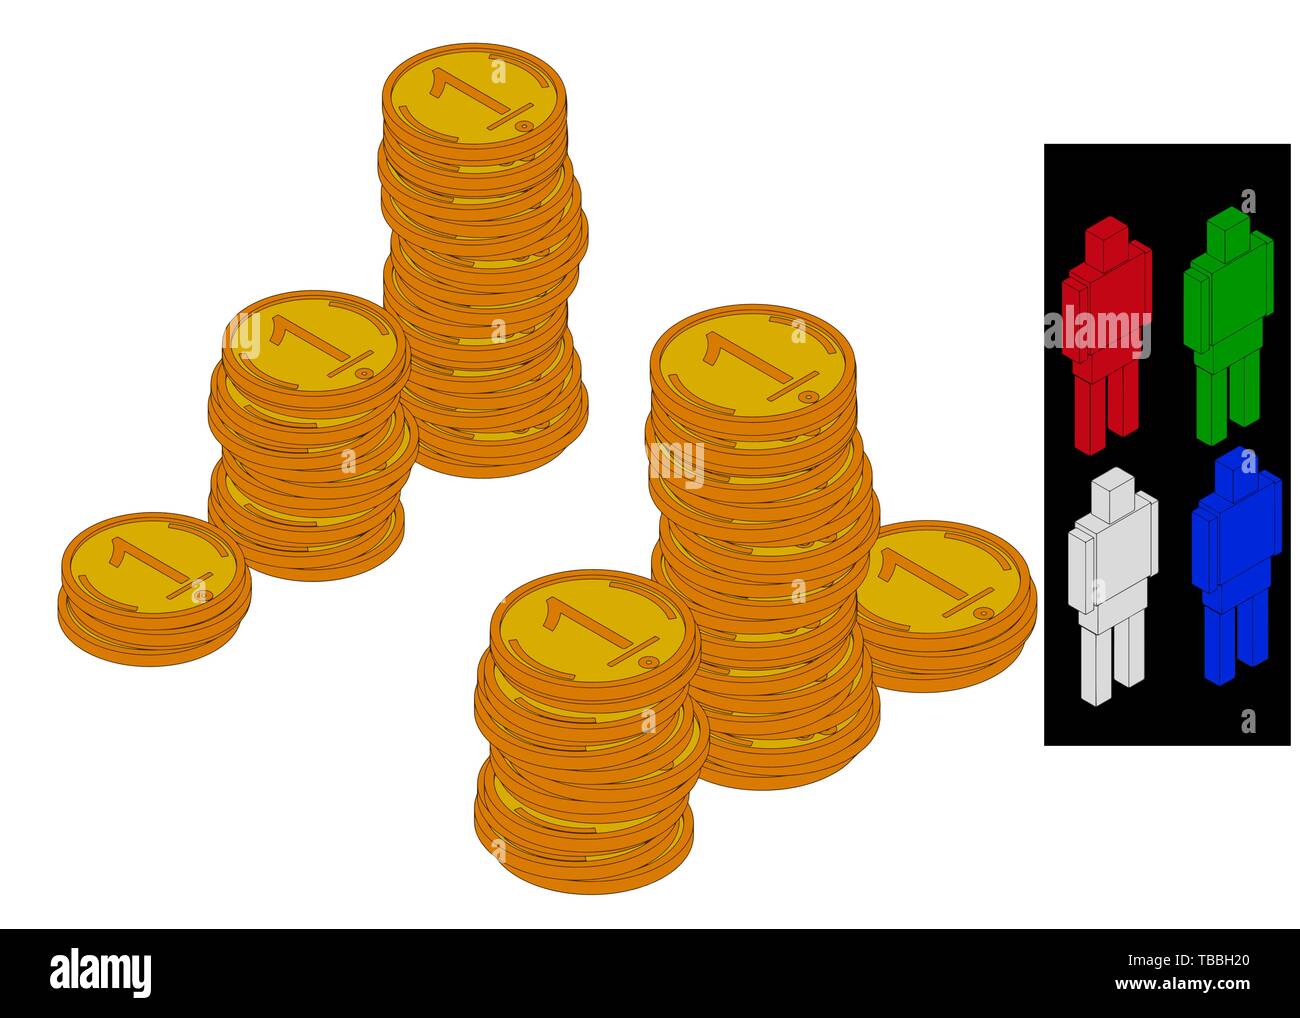 Podium of stacks of coins. Many gold coins in towers. Stock Vector